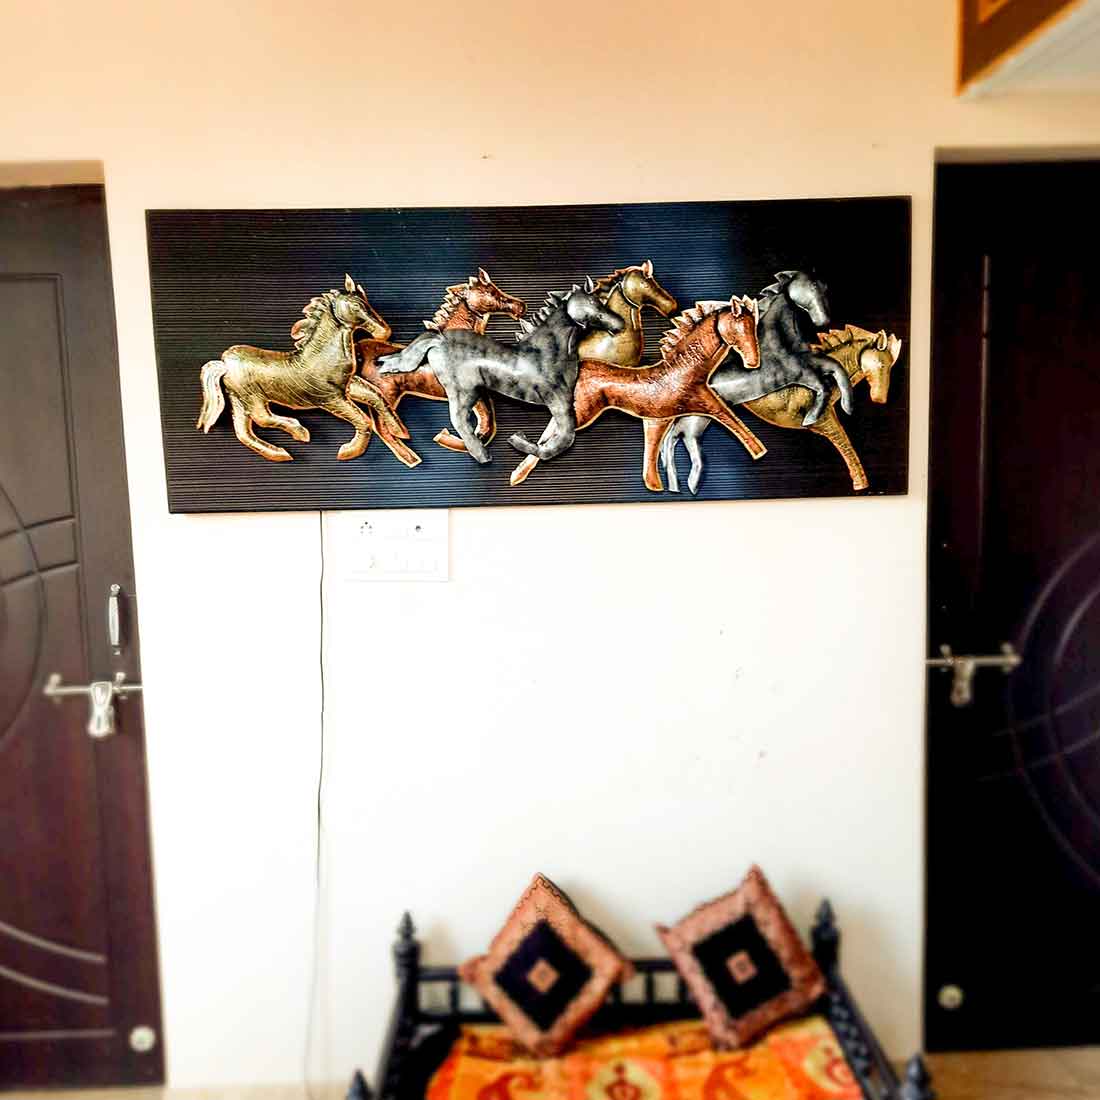 7 Running Horse Wall Hanging with LED Lights | Backlit Horse Wall Decor - for Vastu, Feng Shui, Living Room, Home, Wall Decor & Gifts - 60 inch - Apkamart